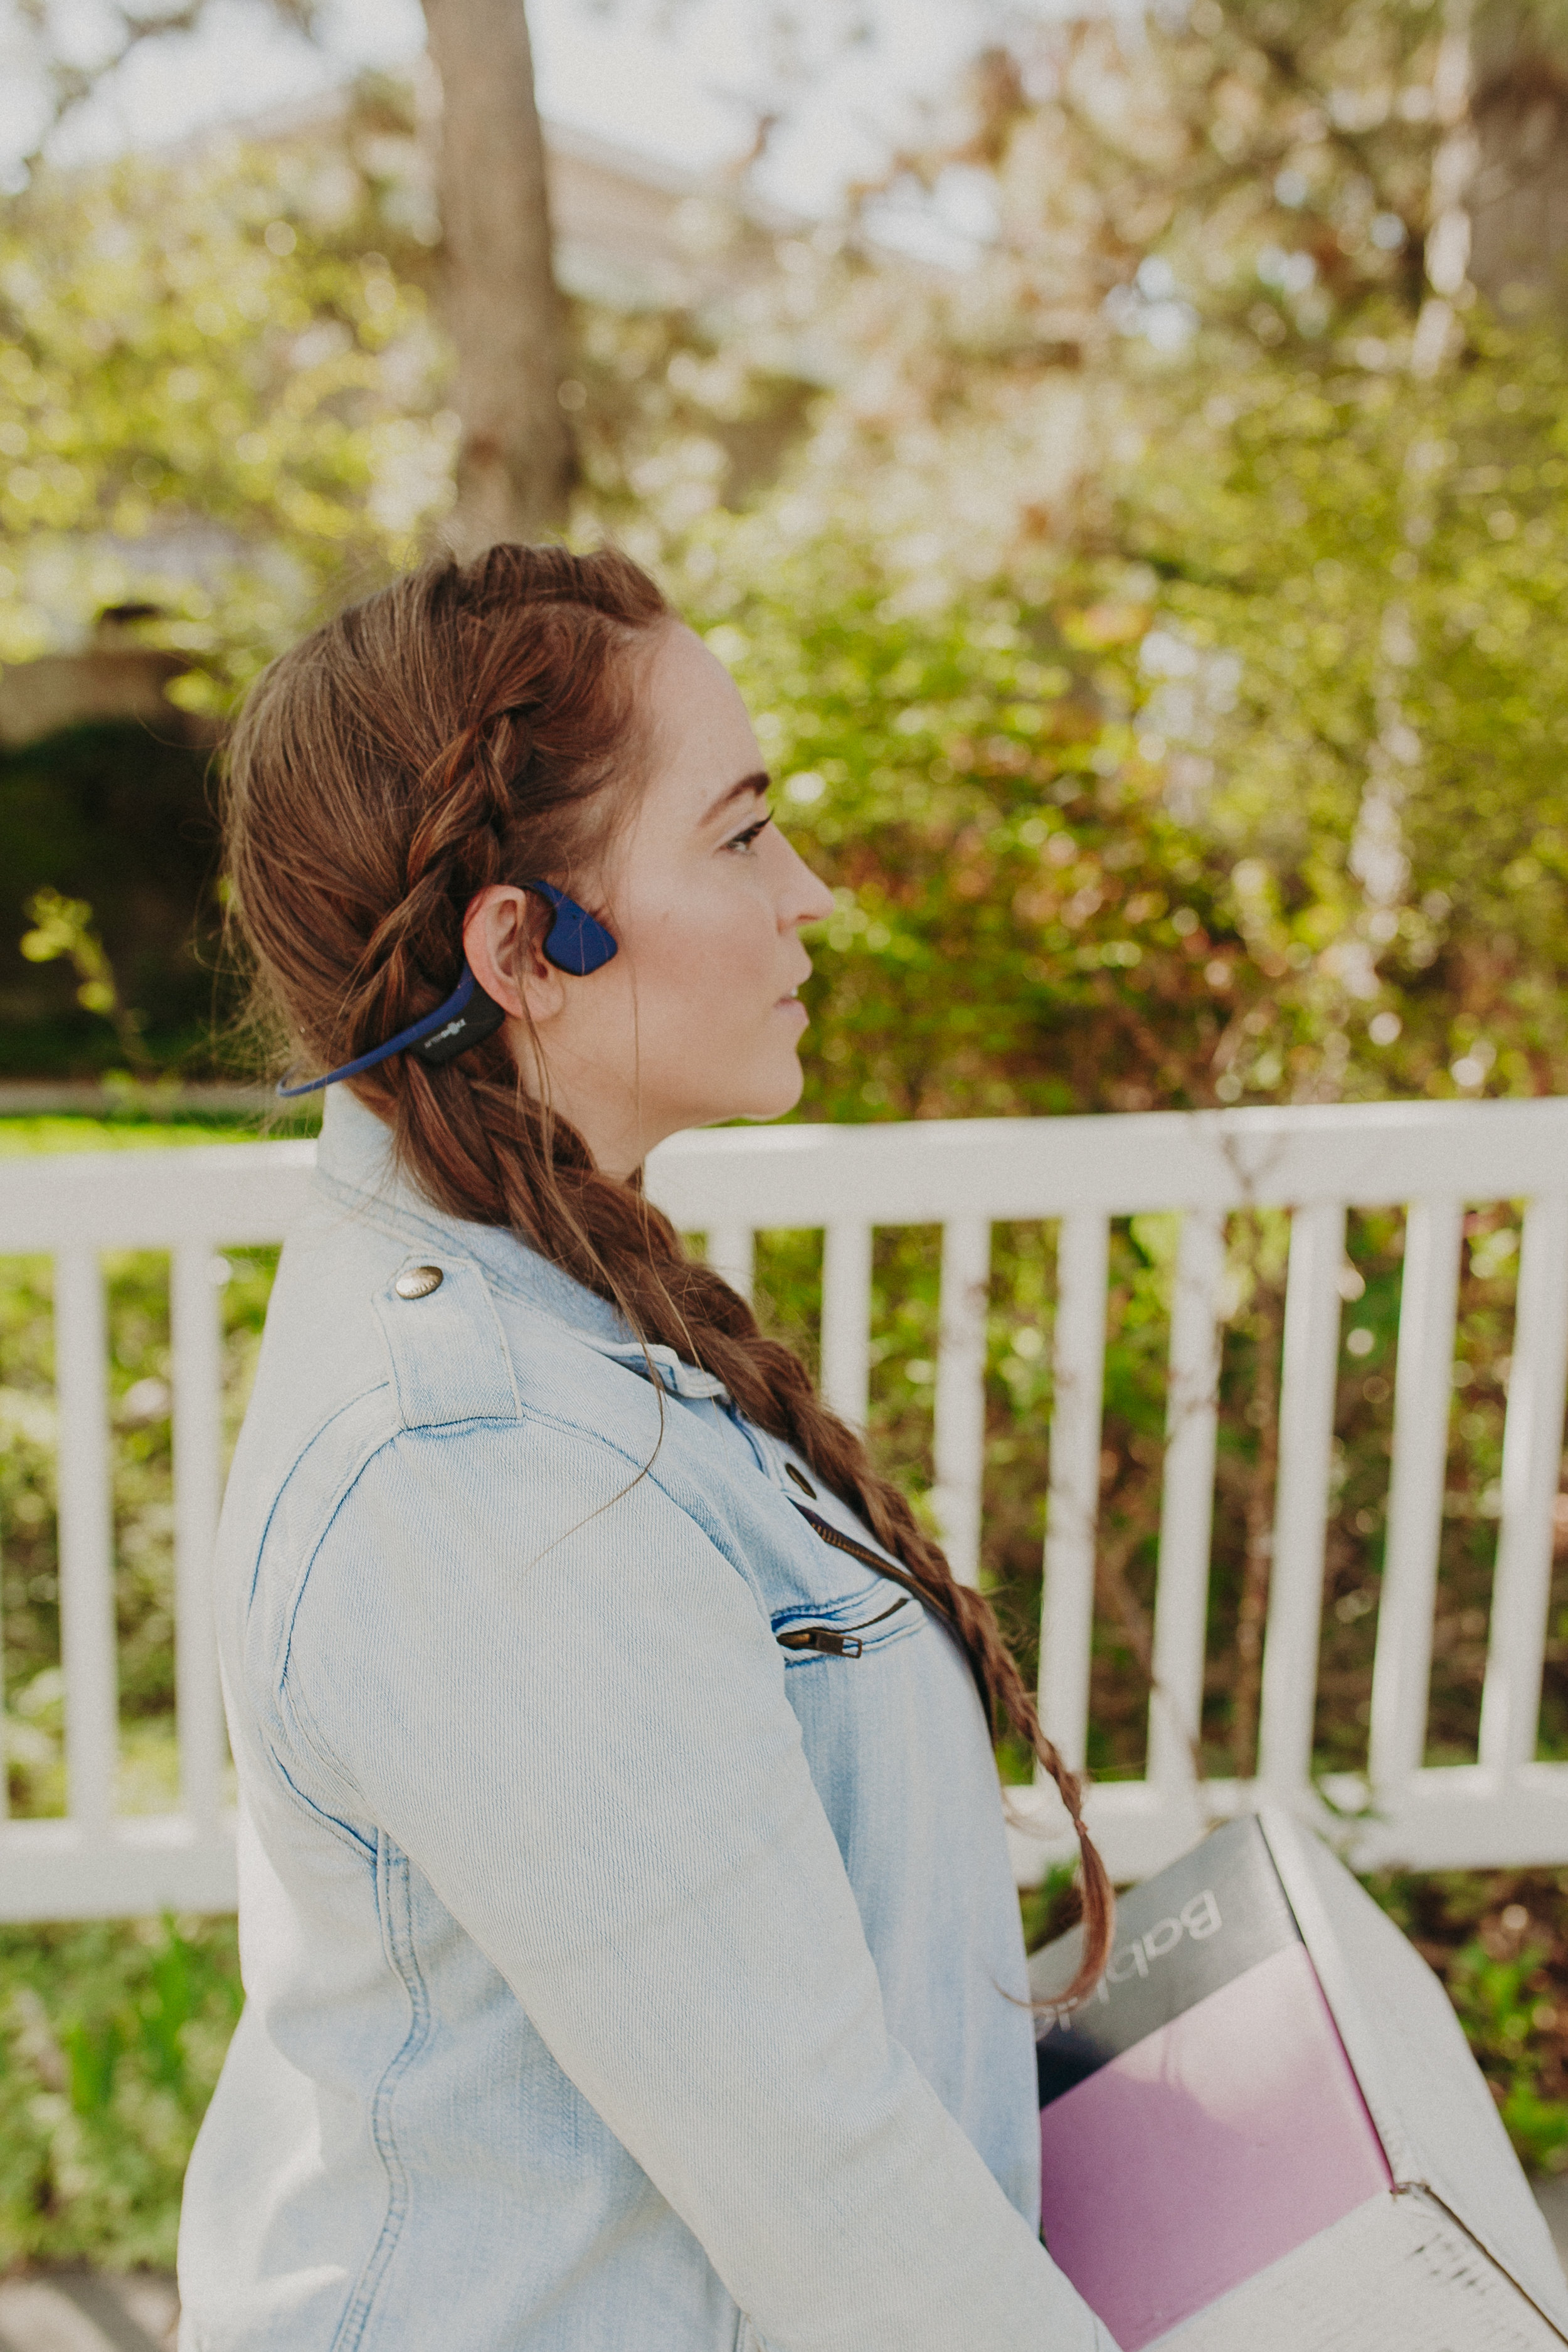    Trekz Air from Aftershokz    Meet the next generation in technology when you try these amazing ear headphones! Be open and motivated with AfterShokz Bone Conduction technology. Their lightweight and bulk-free design fits securely and was inspired 